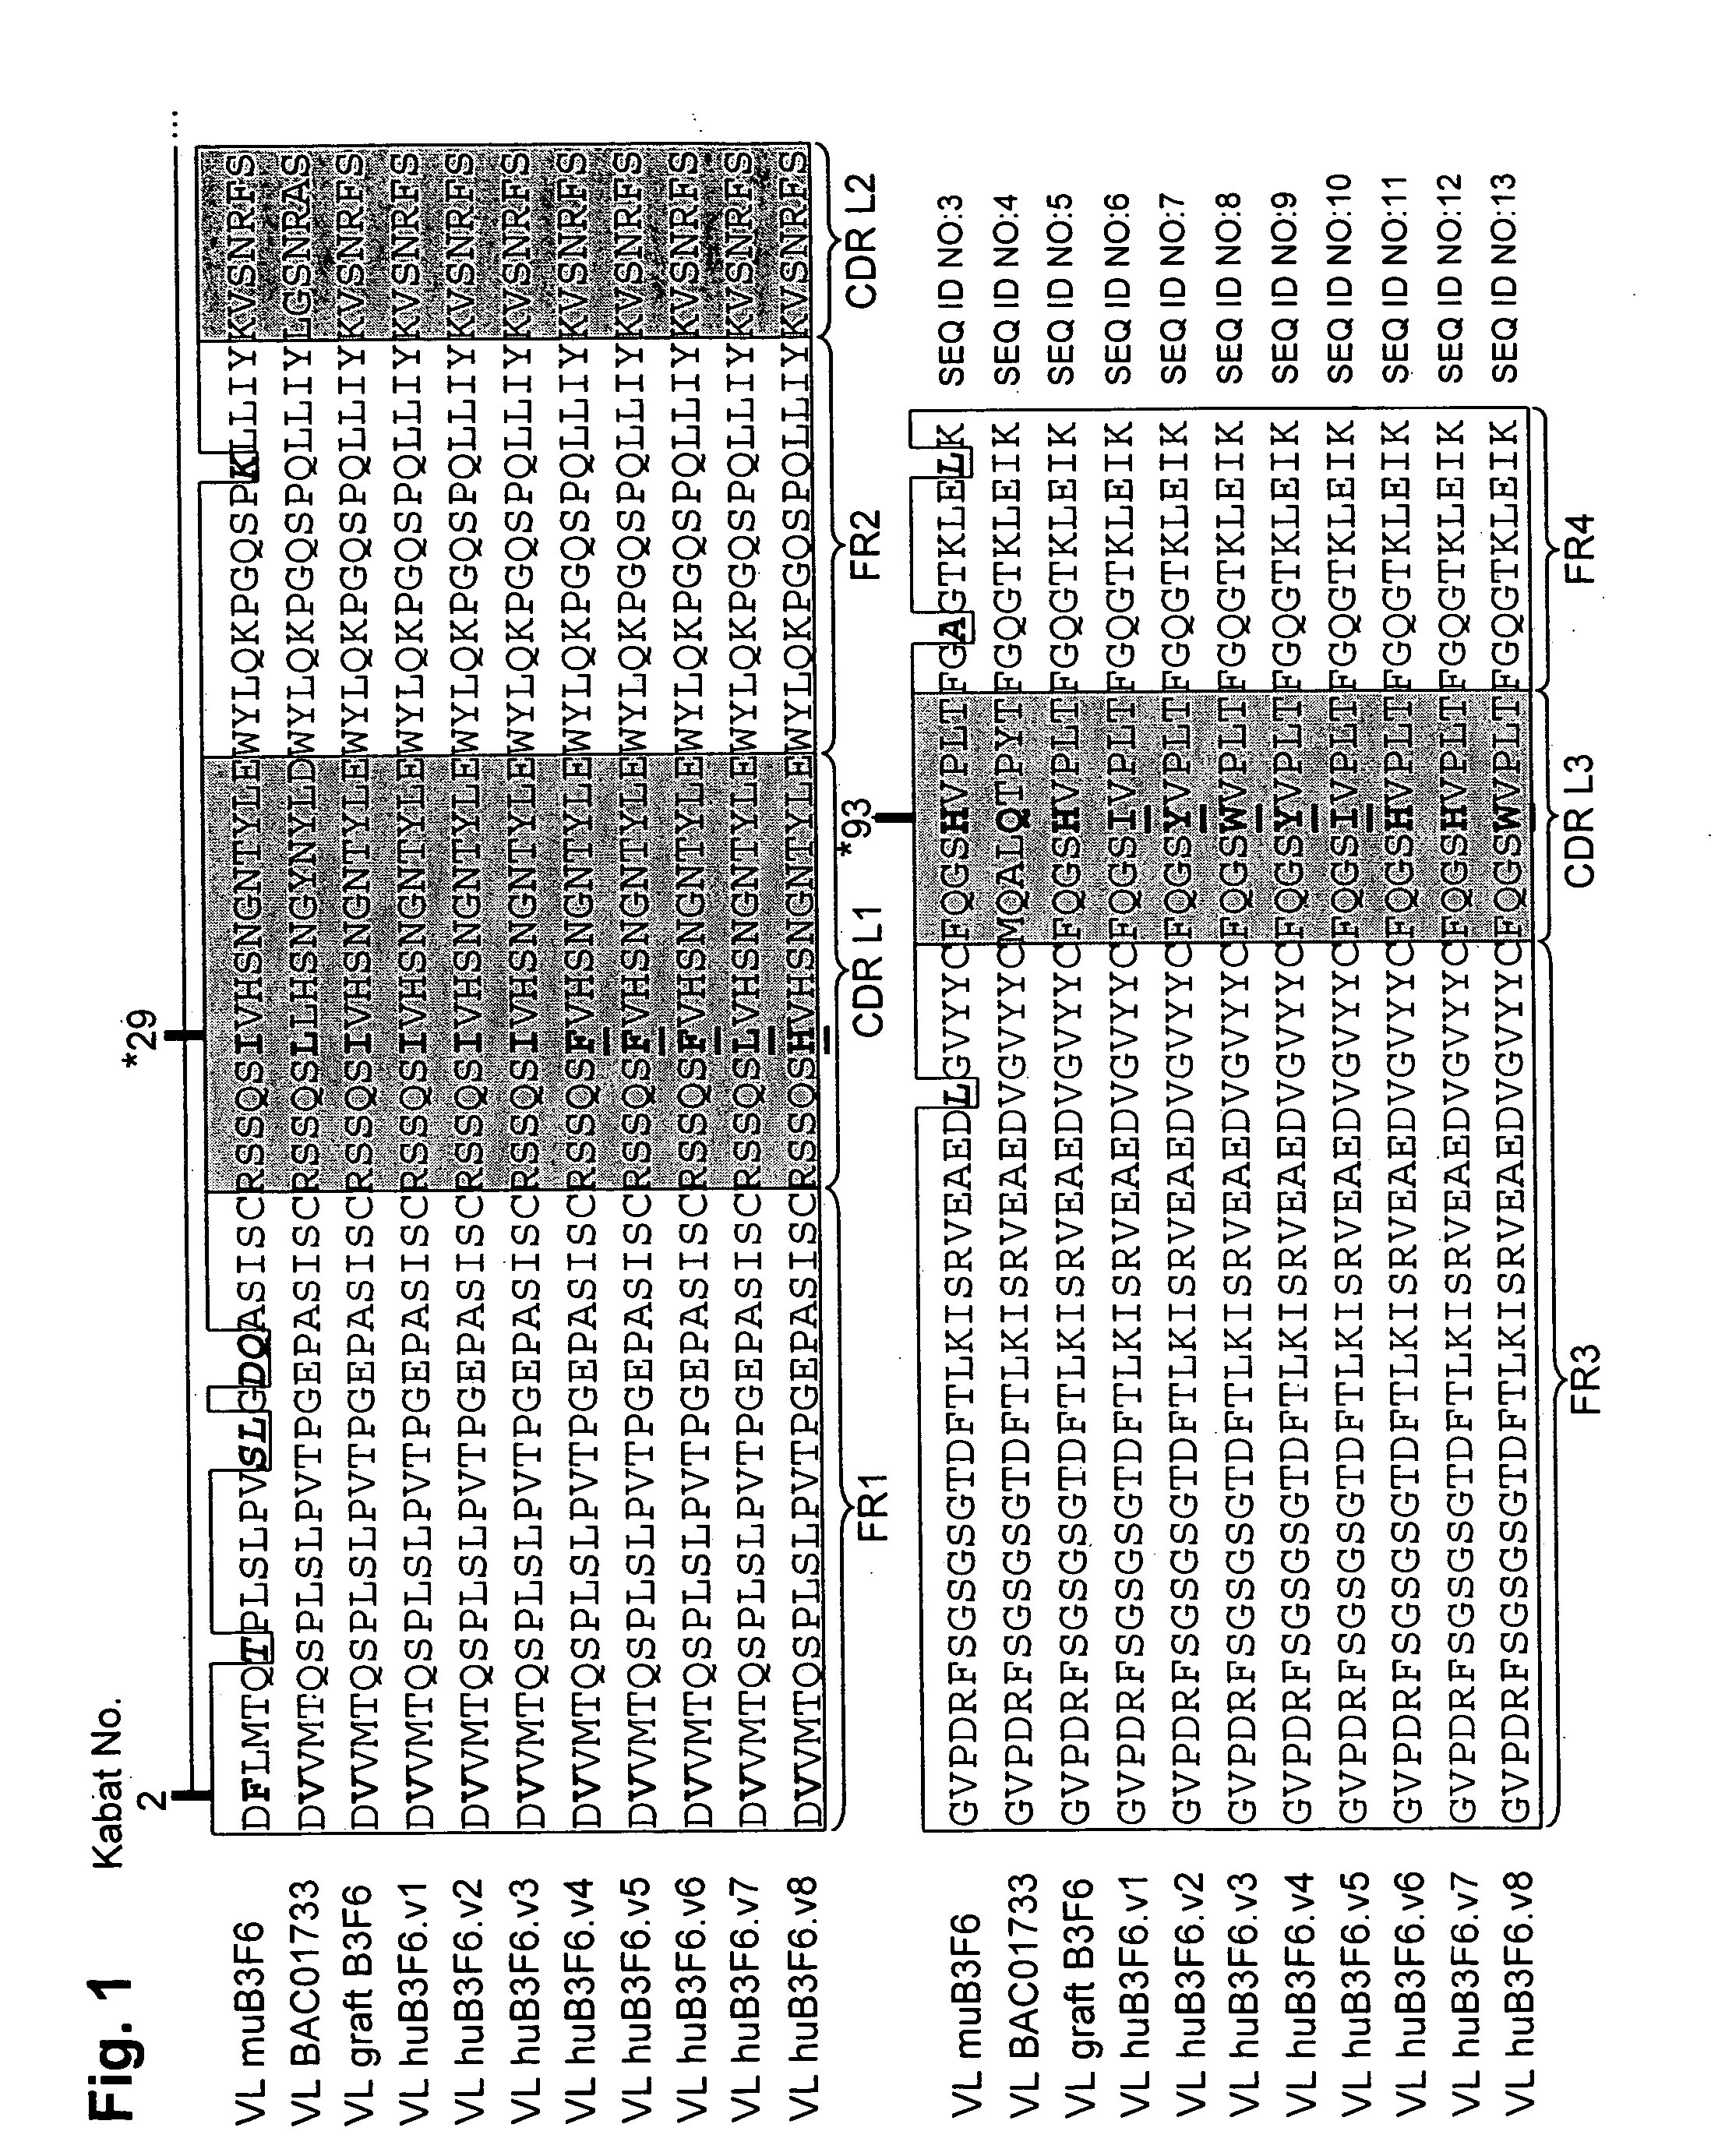 Methods of humanizing immunoglobulin variable regions through rational modification of complementarity determining residues